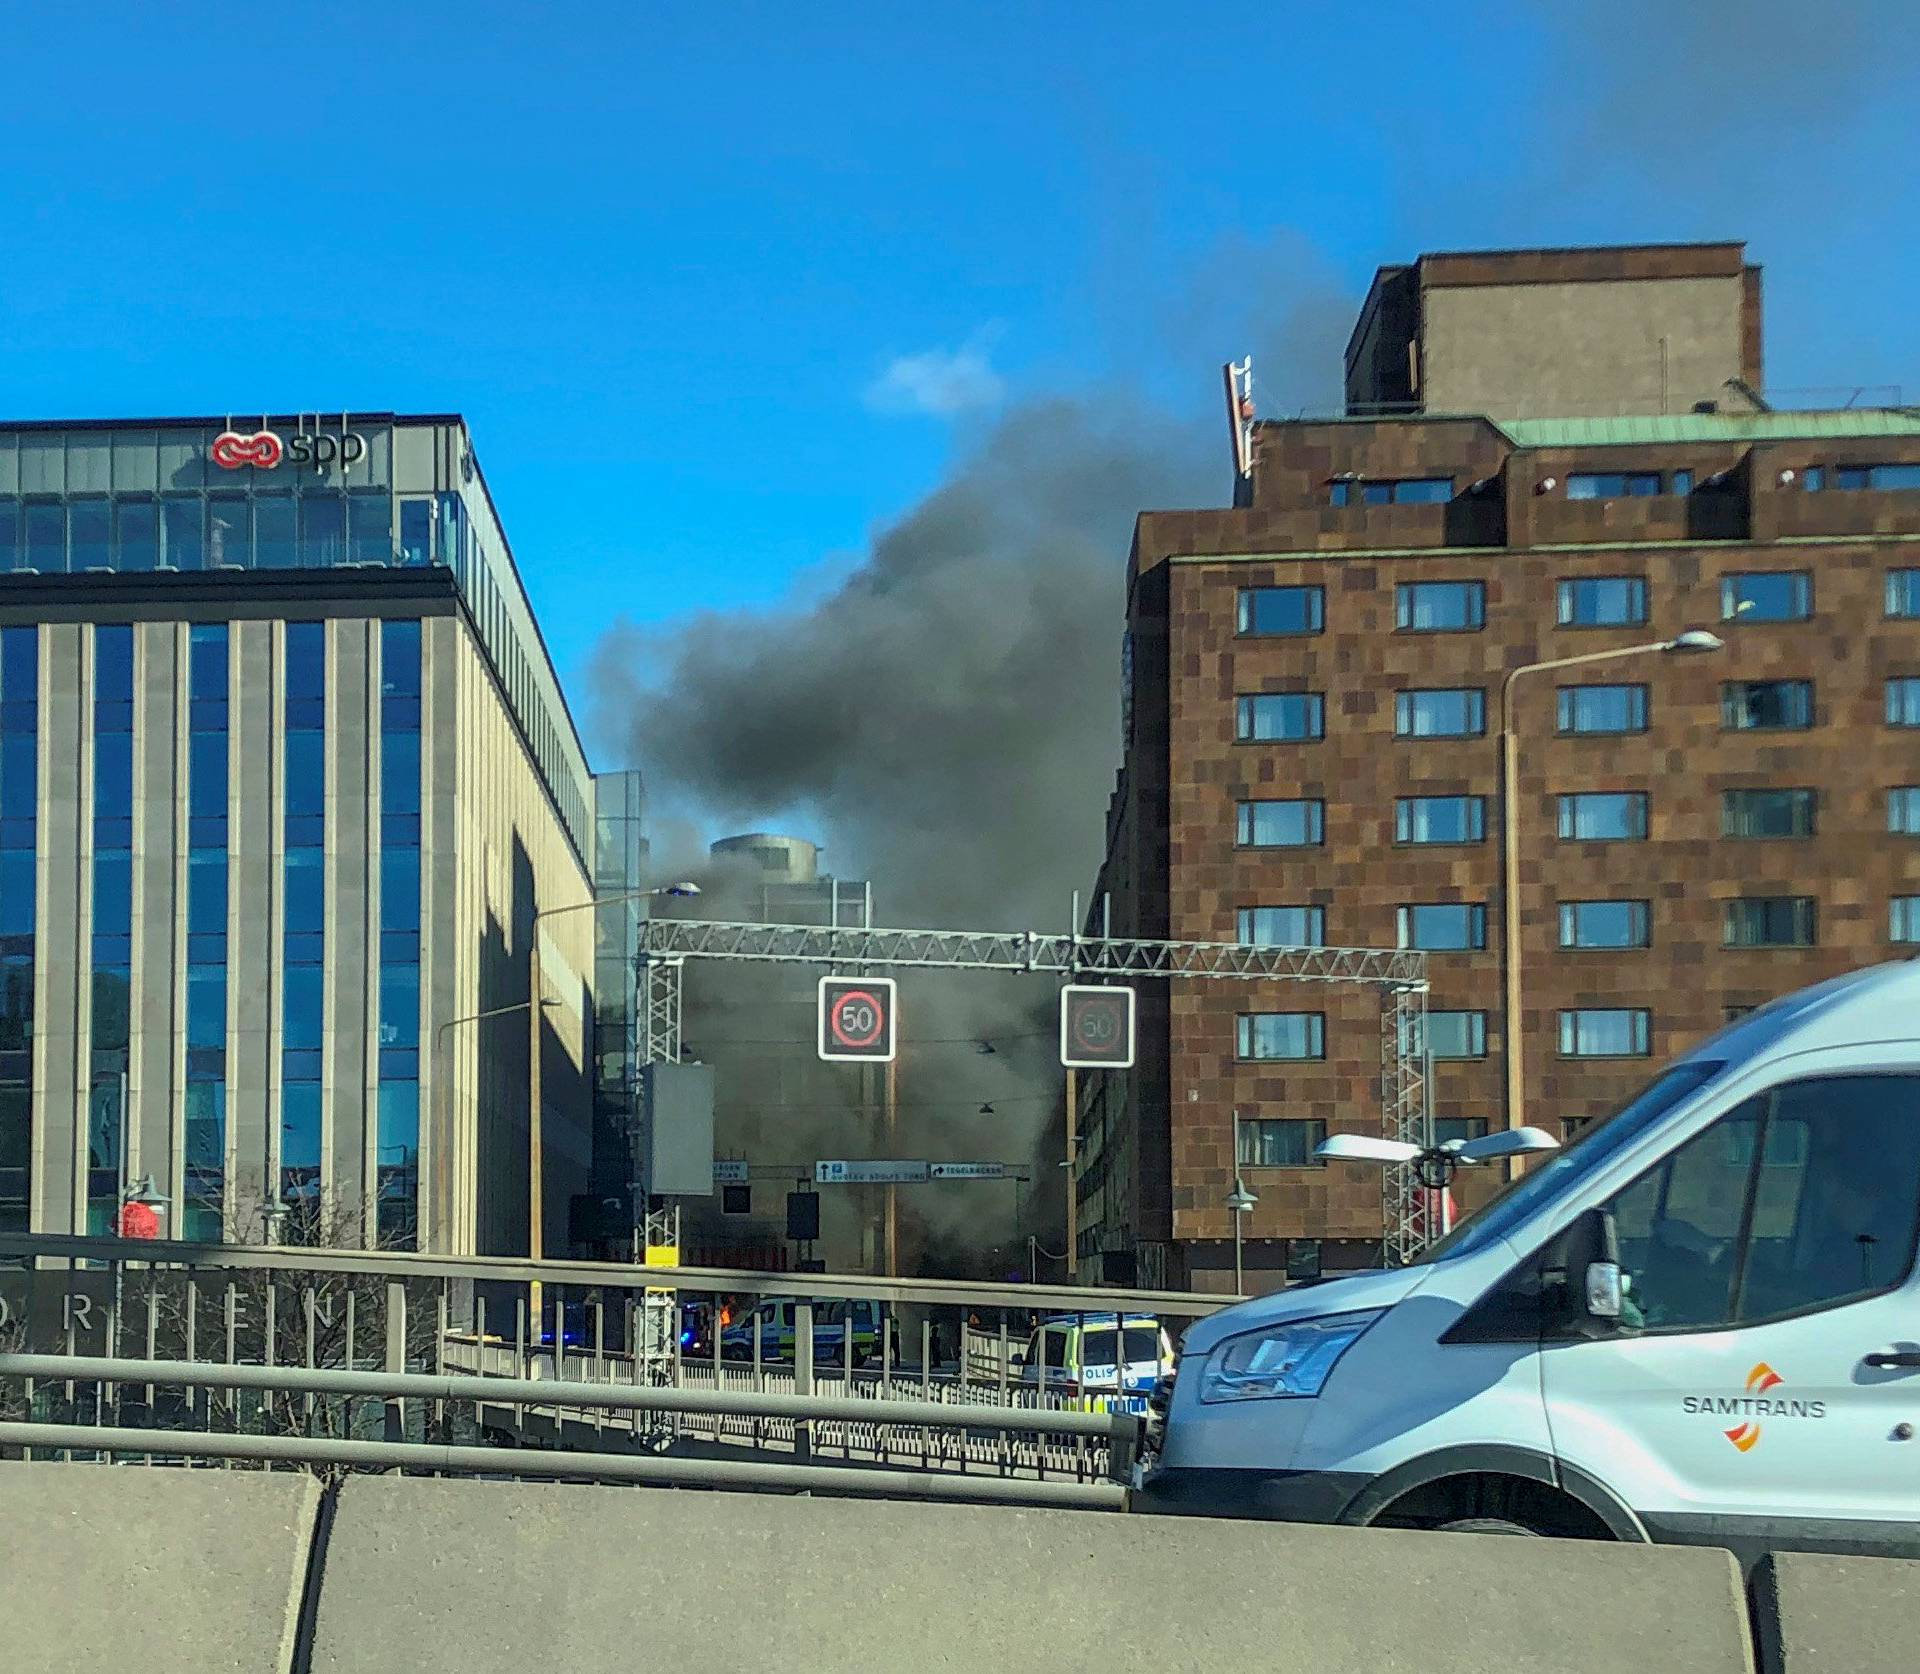 Smoke from a bus explosion and fire is seen in Tegelbacken in central Stockholm